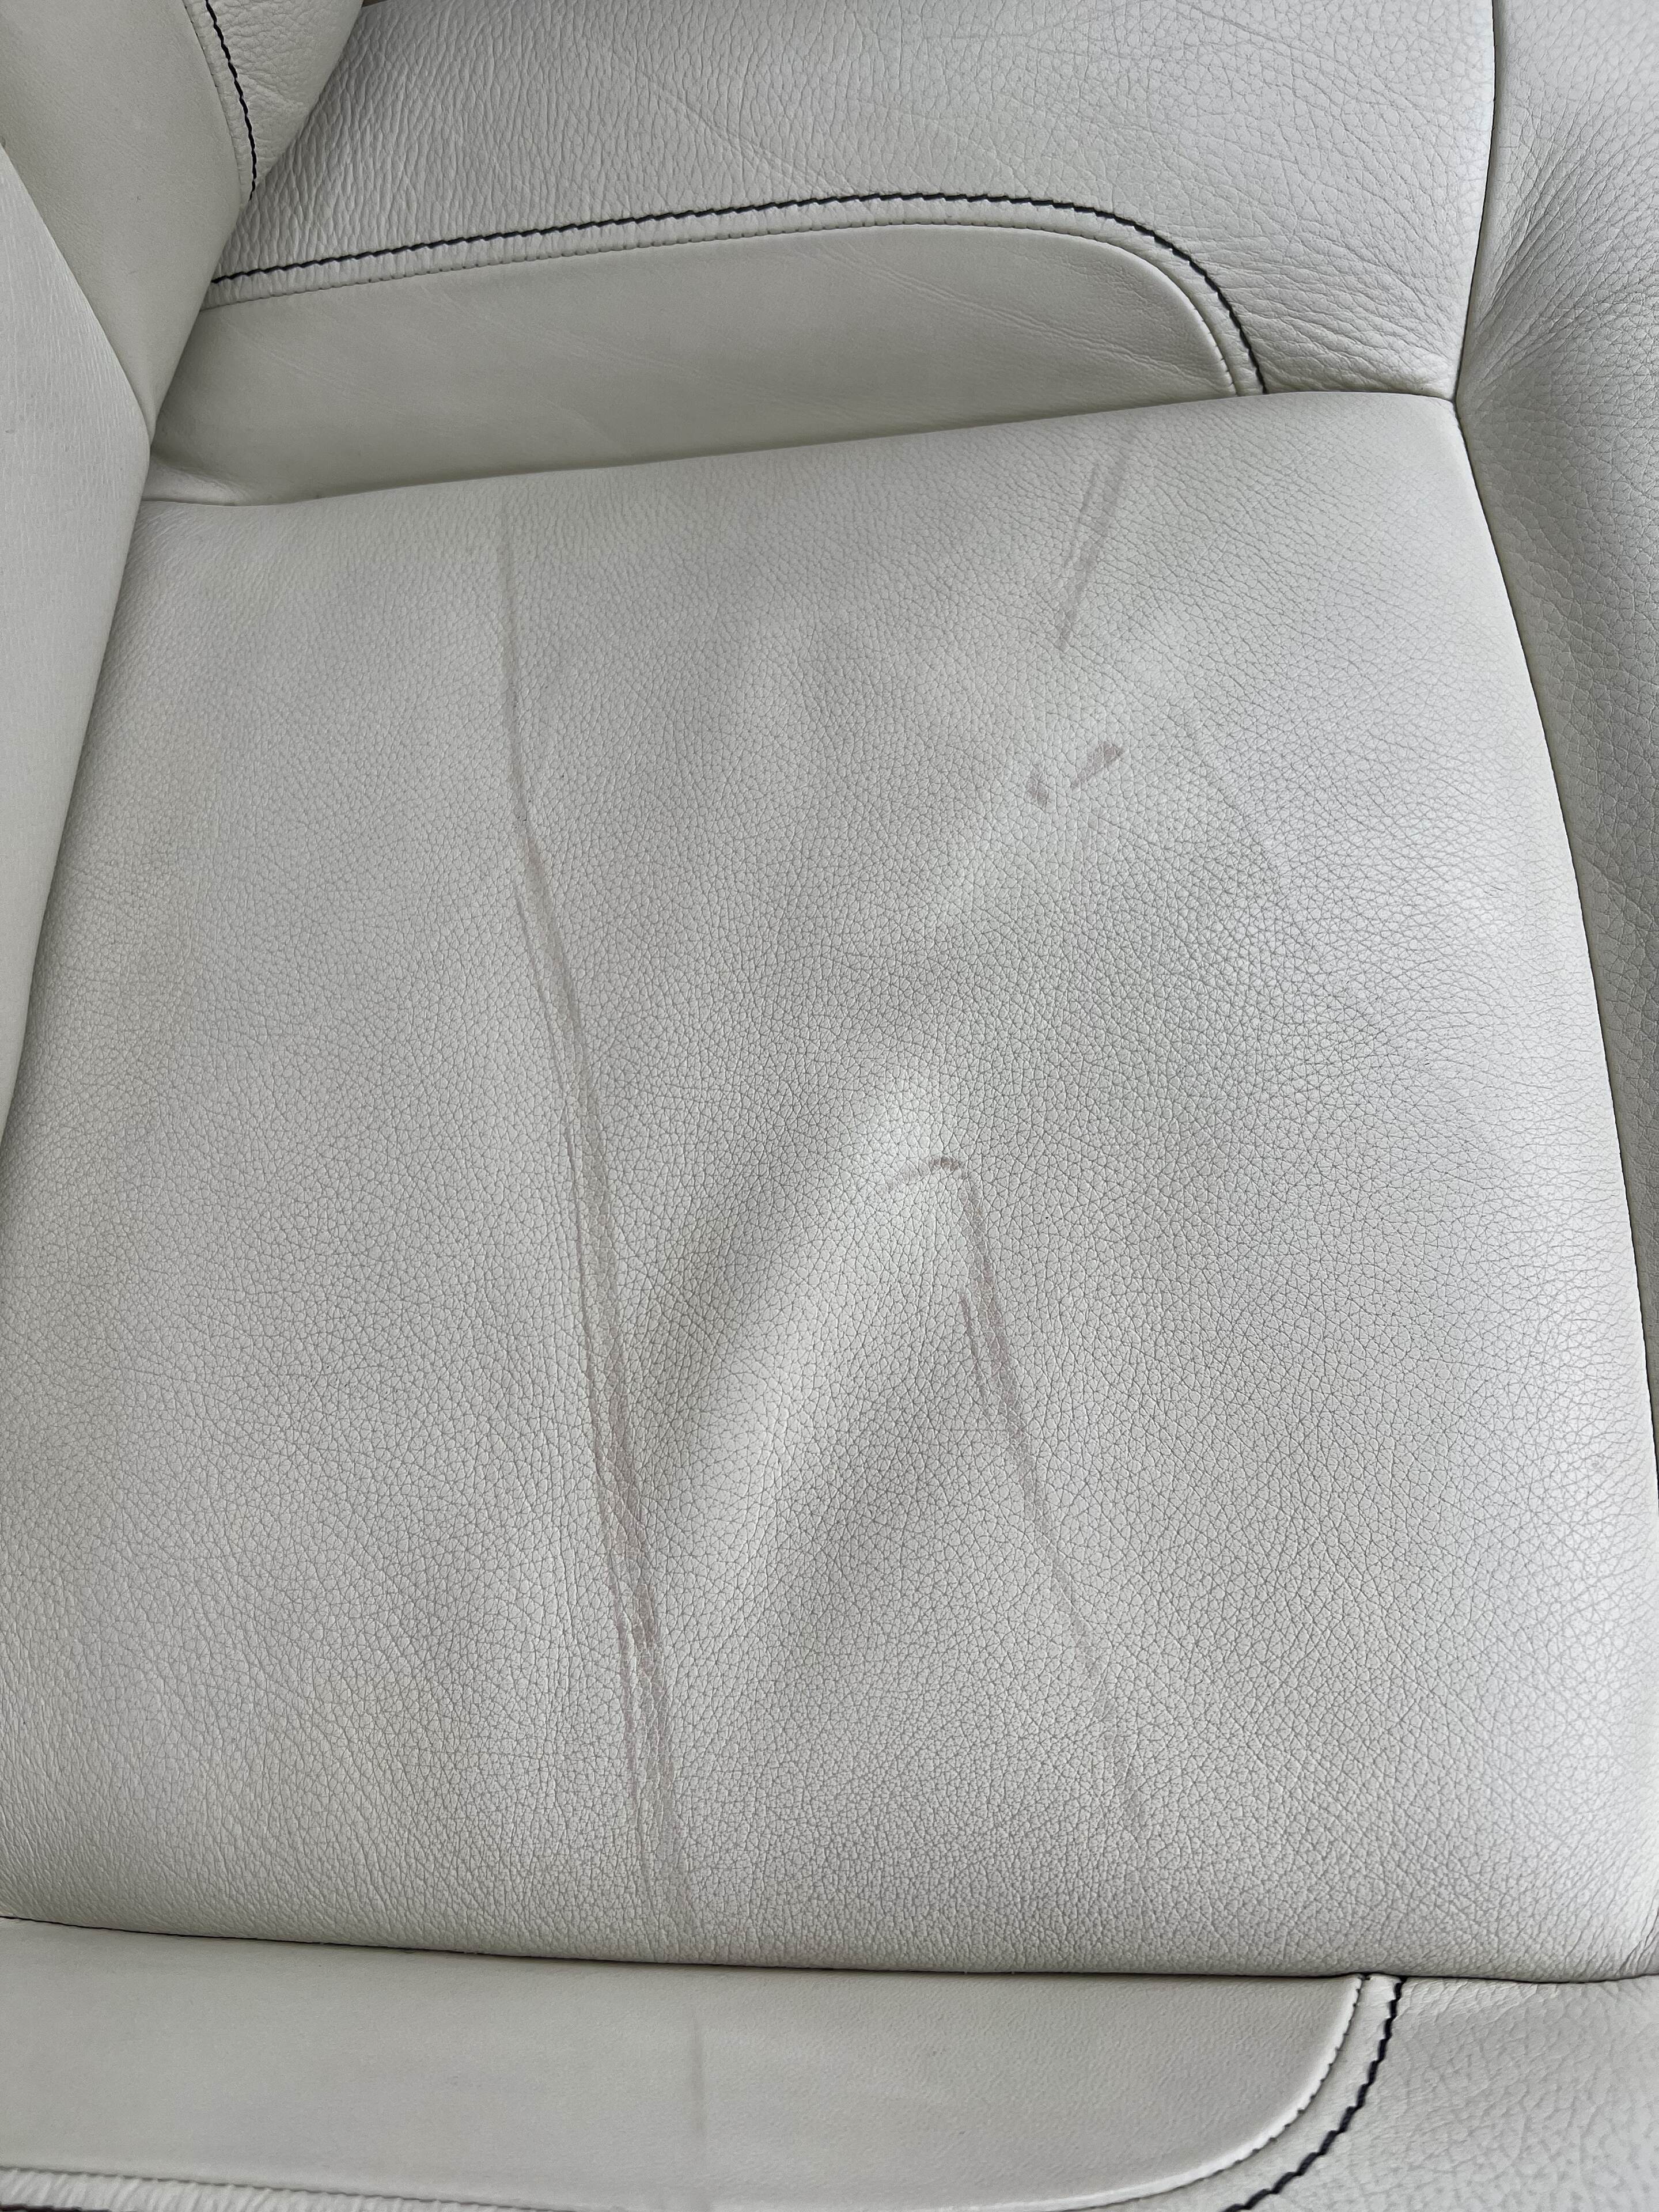 How to get this off my seat? - Page 1 - Bodywork & Detailing - PistonHeads UK